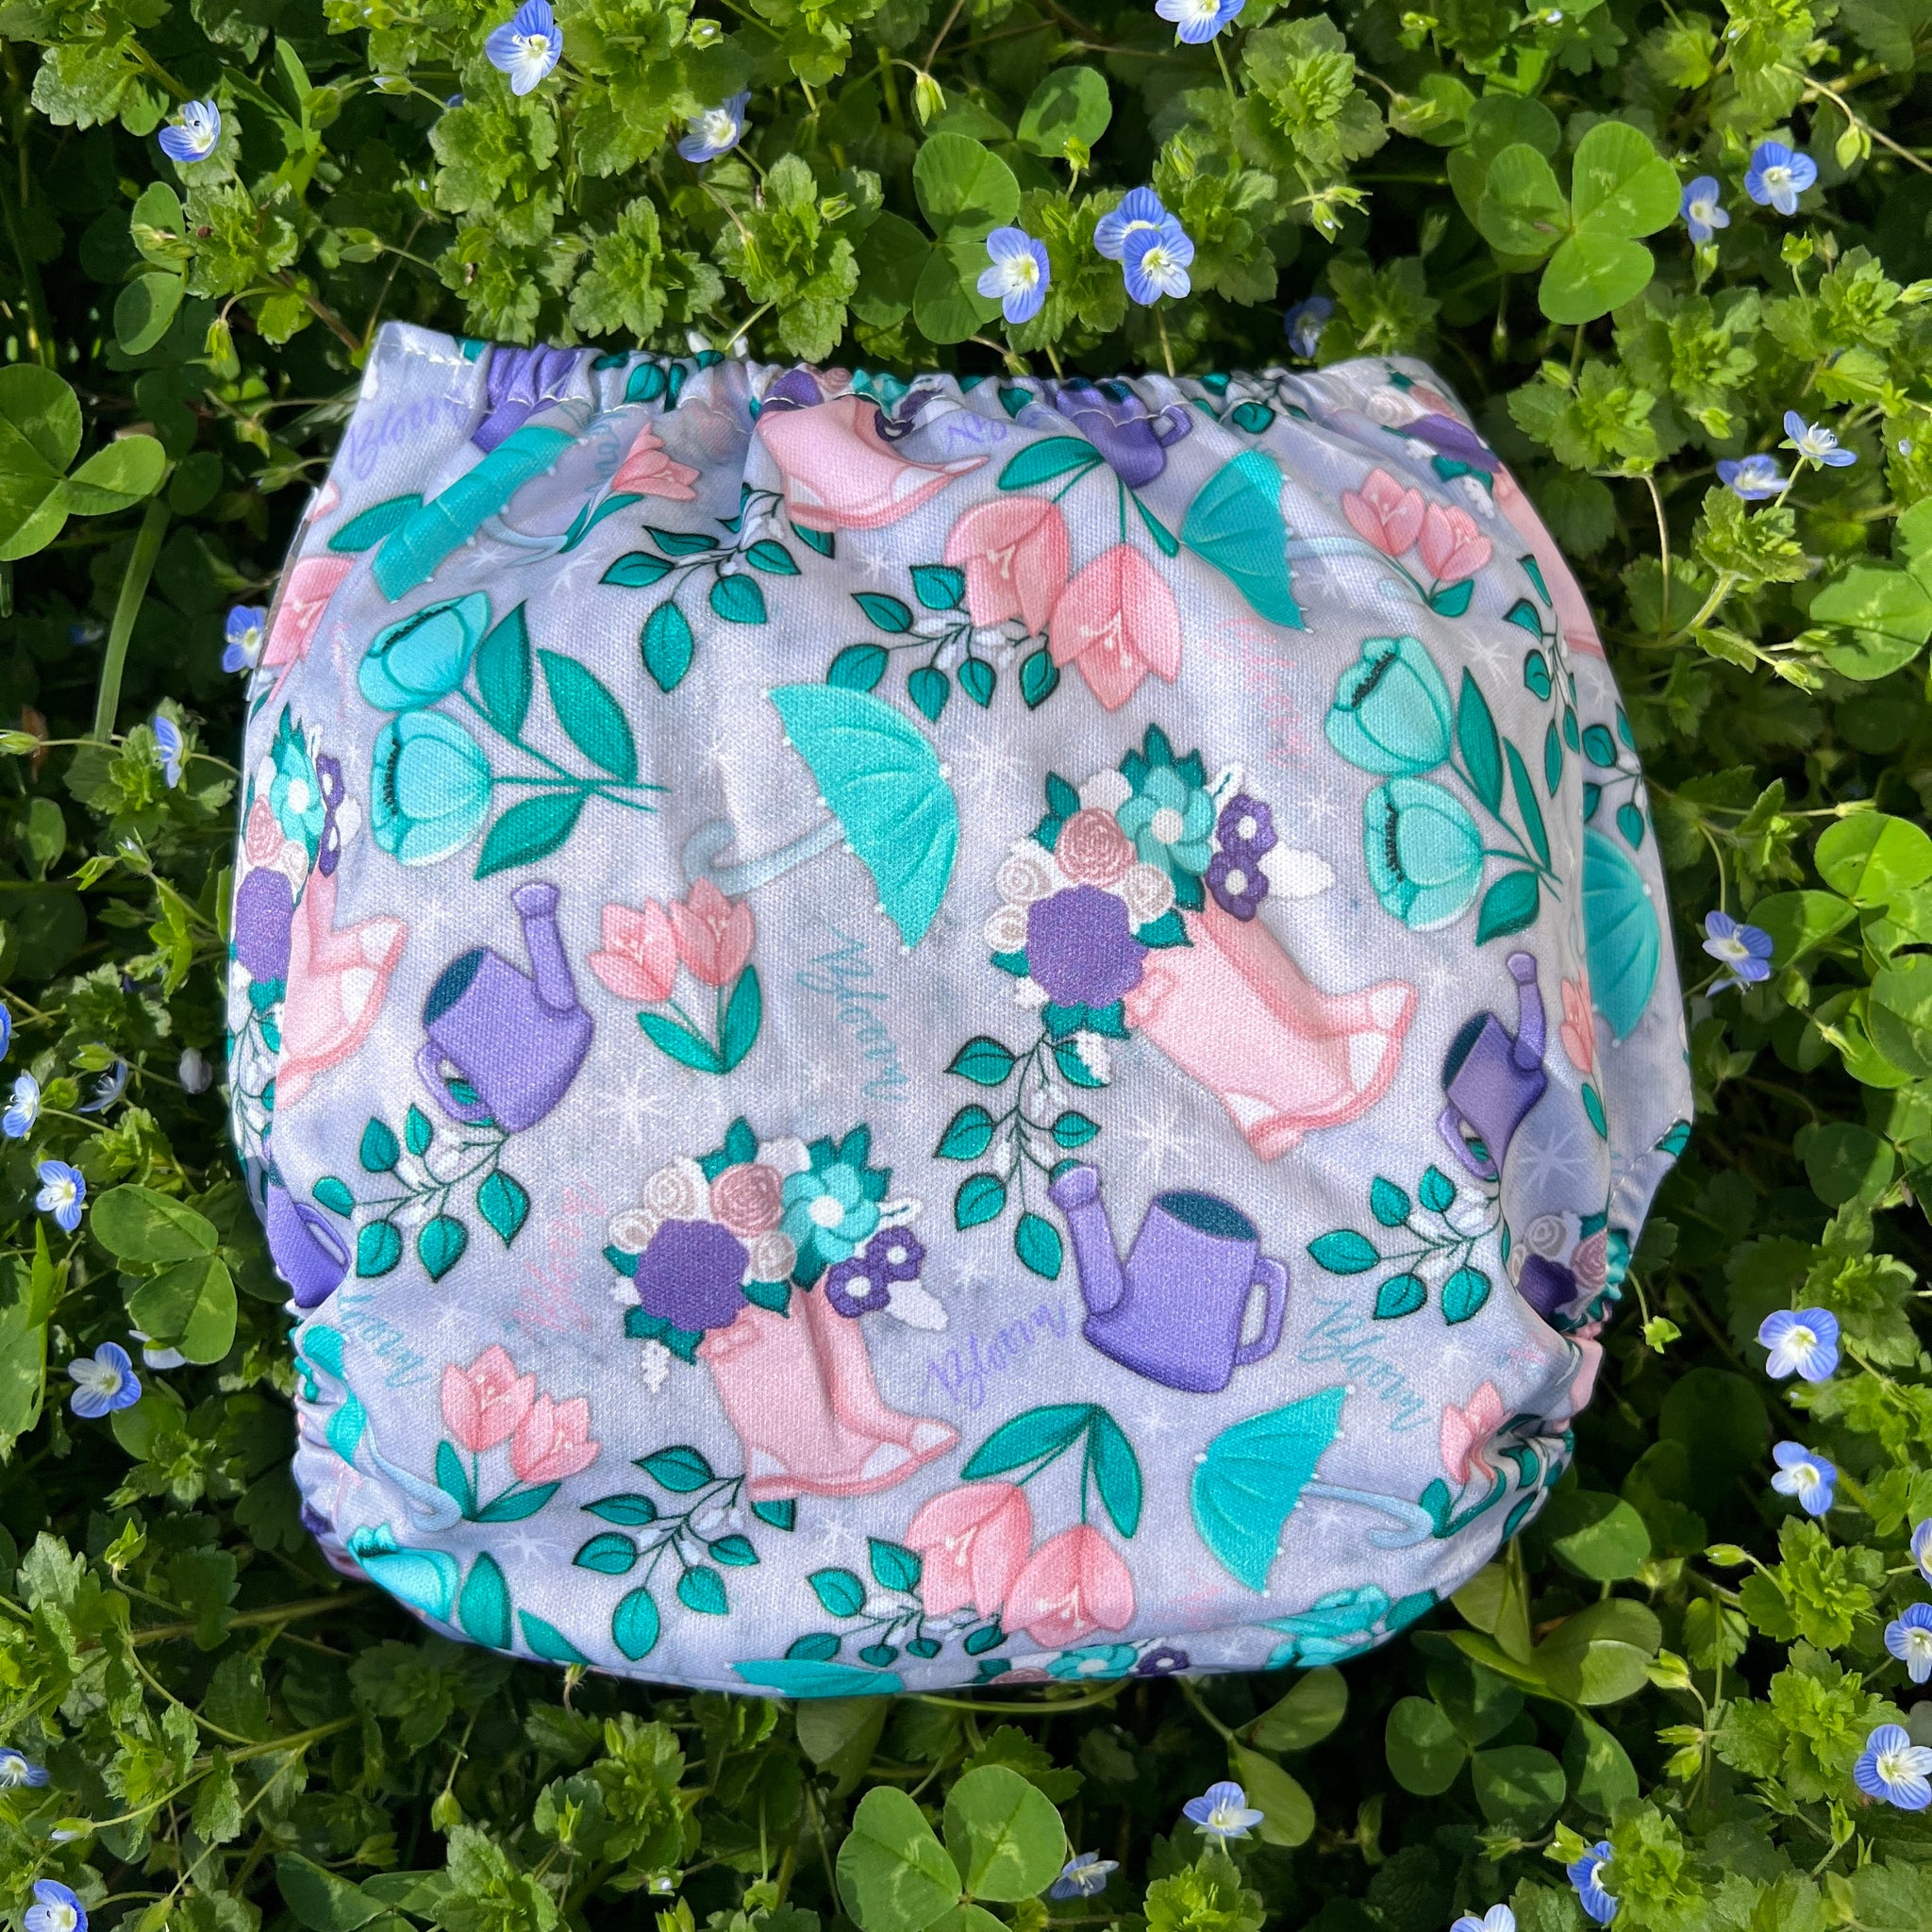 Little Bunny Tails - The BIGGER Bunny - Larger One Size Pocket Diaper